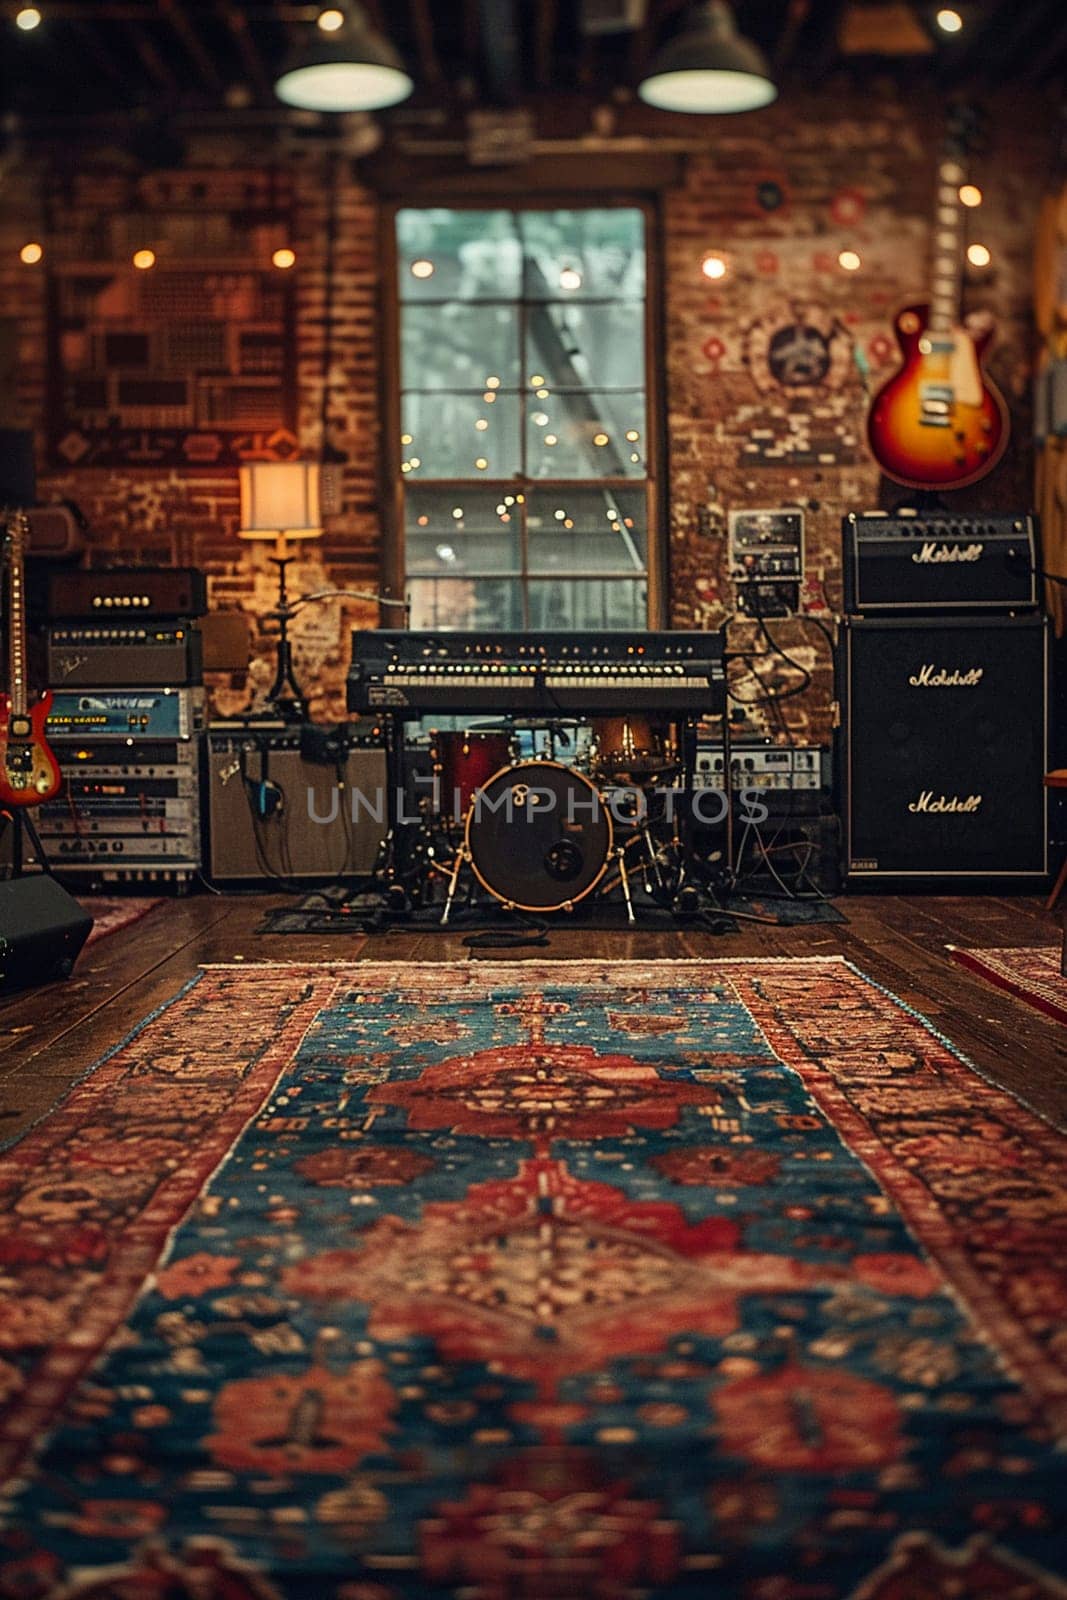 Harmonic Music Rehearsal Space Nurtures Musicianship in Business of Sound Crafting and Band Dynamics, Amplifiers and drum sets nurture musicianship and sound crafting in the harmonic music rehearsal space business.